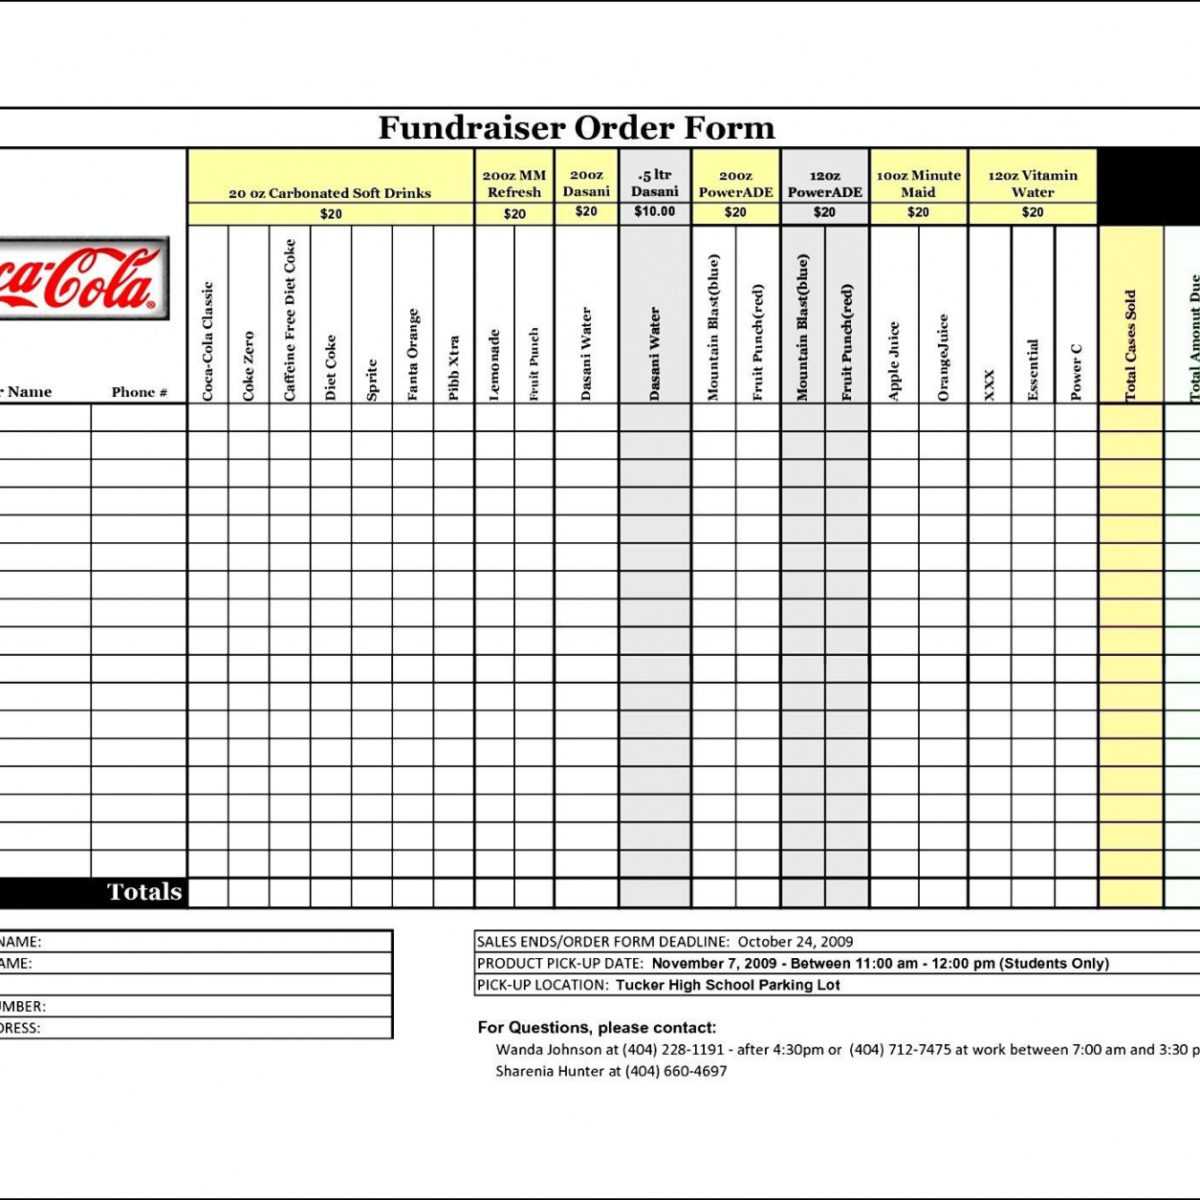 Printable 001 Fundraiser Order Form Template Incredible Regarding Blank Fundraiser Order Form Template